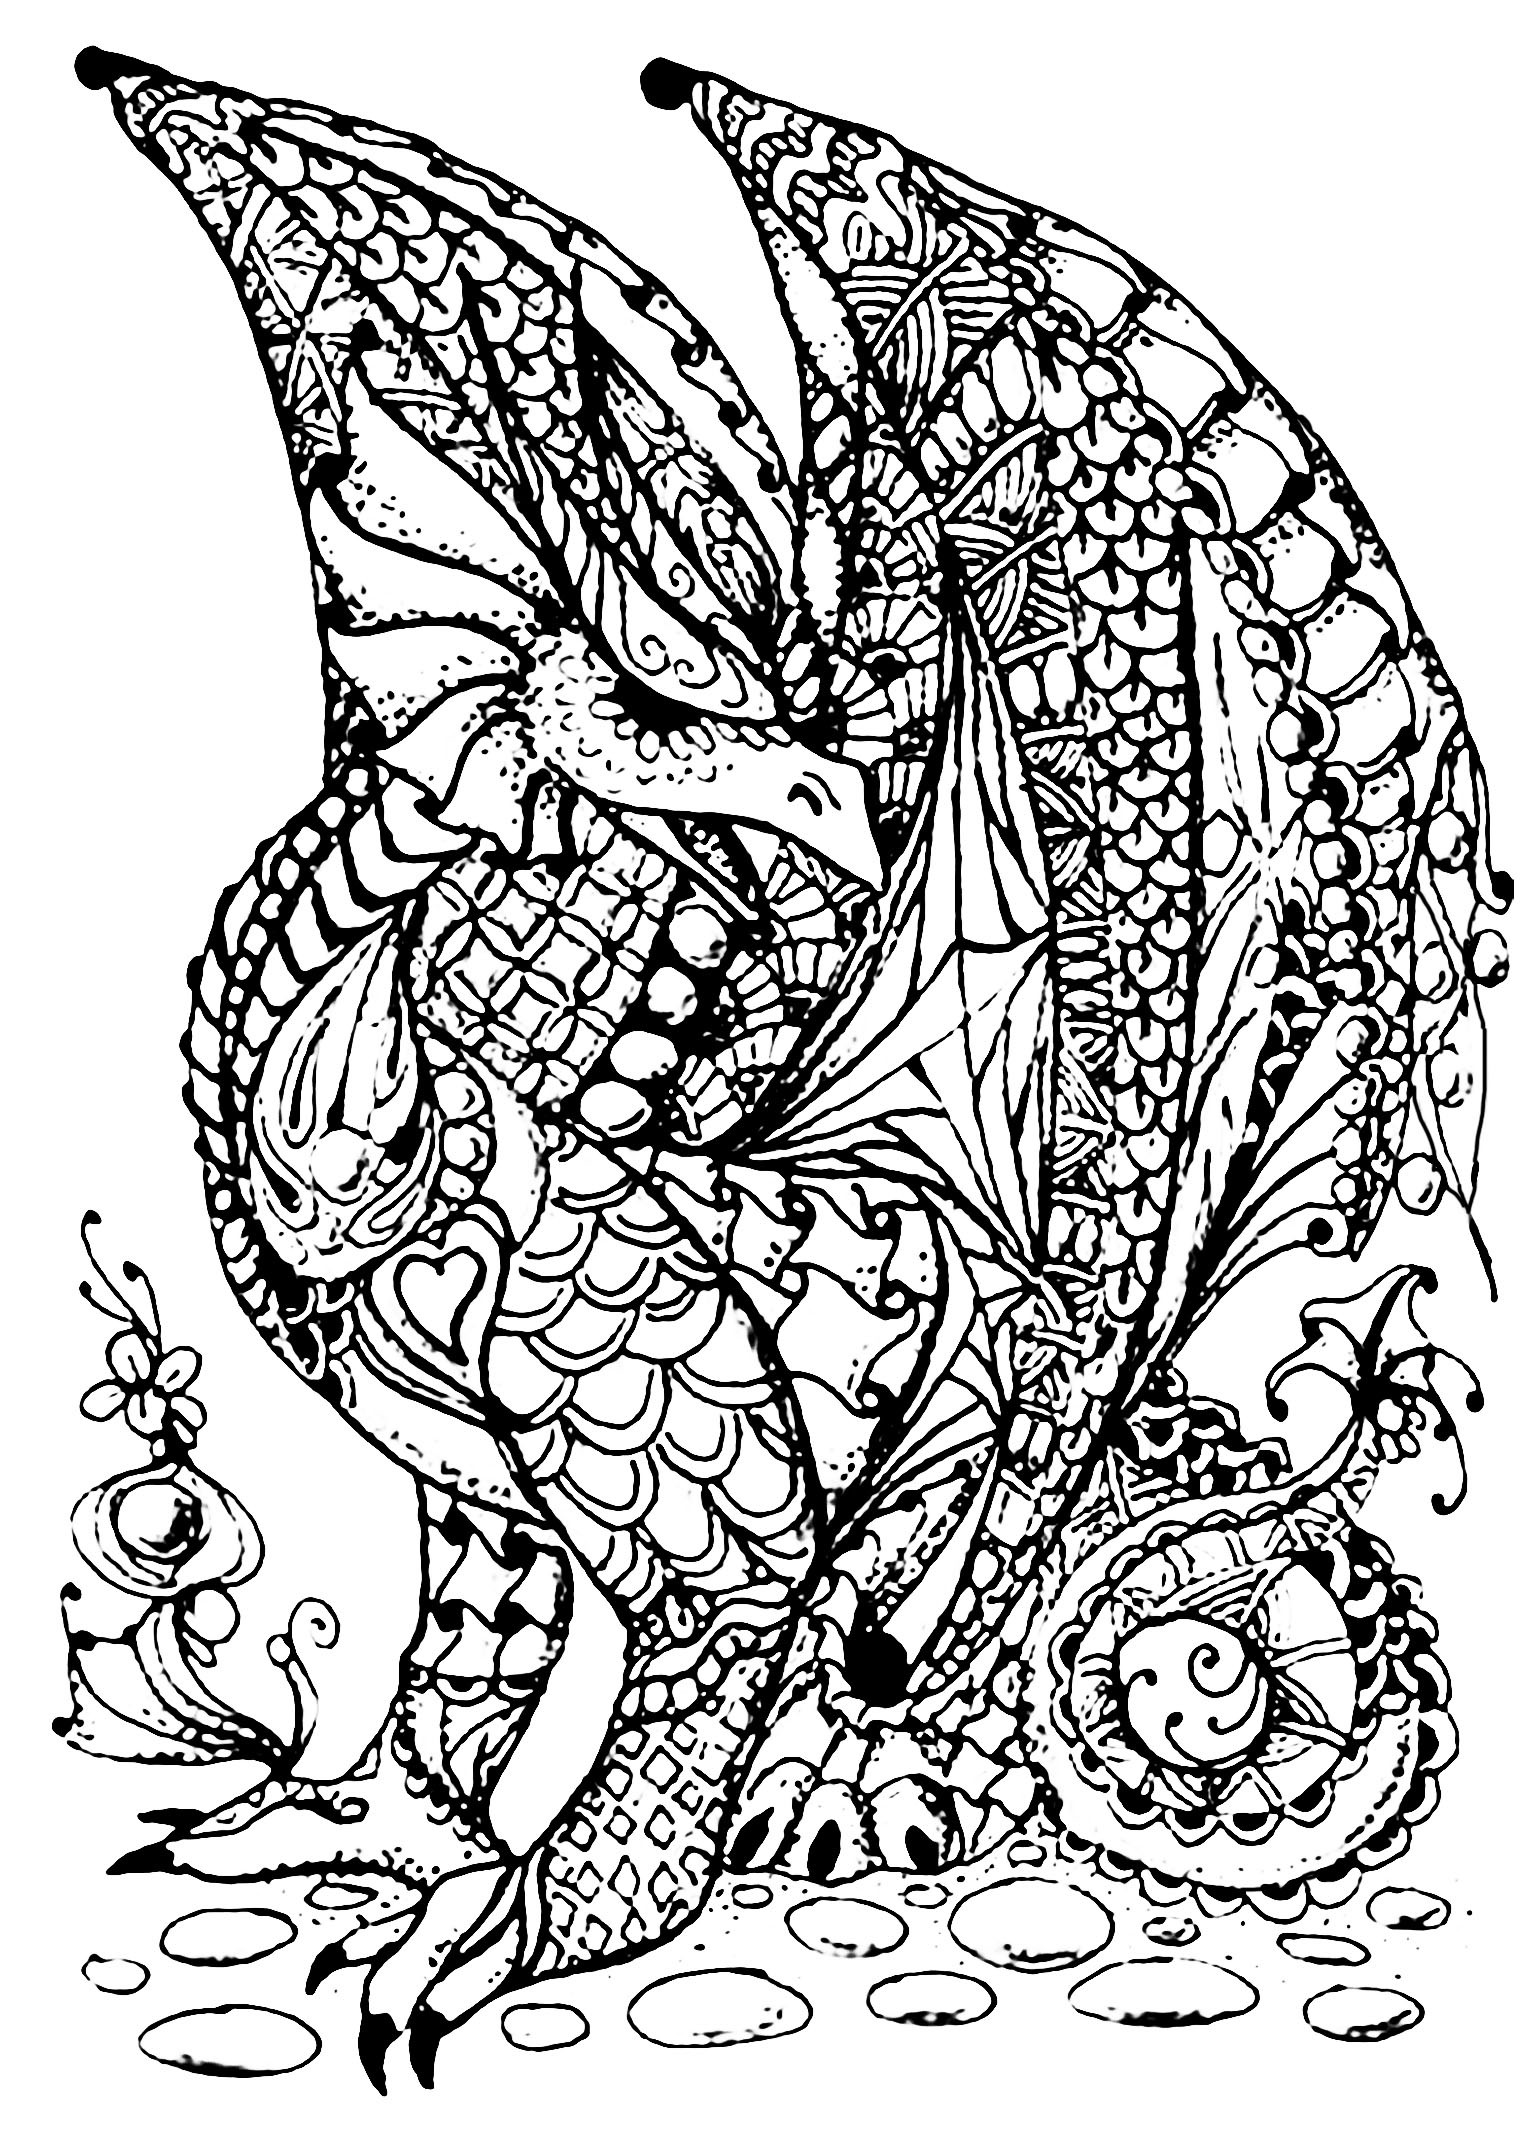 Dragon Coloring Pages For Adults Printable
 Dragon full of scales Dragons Adult Coloring Pages